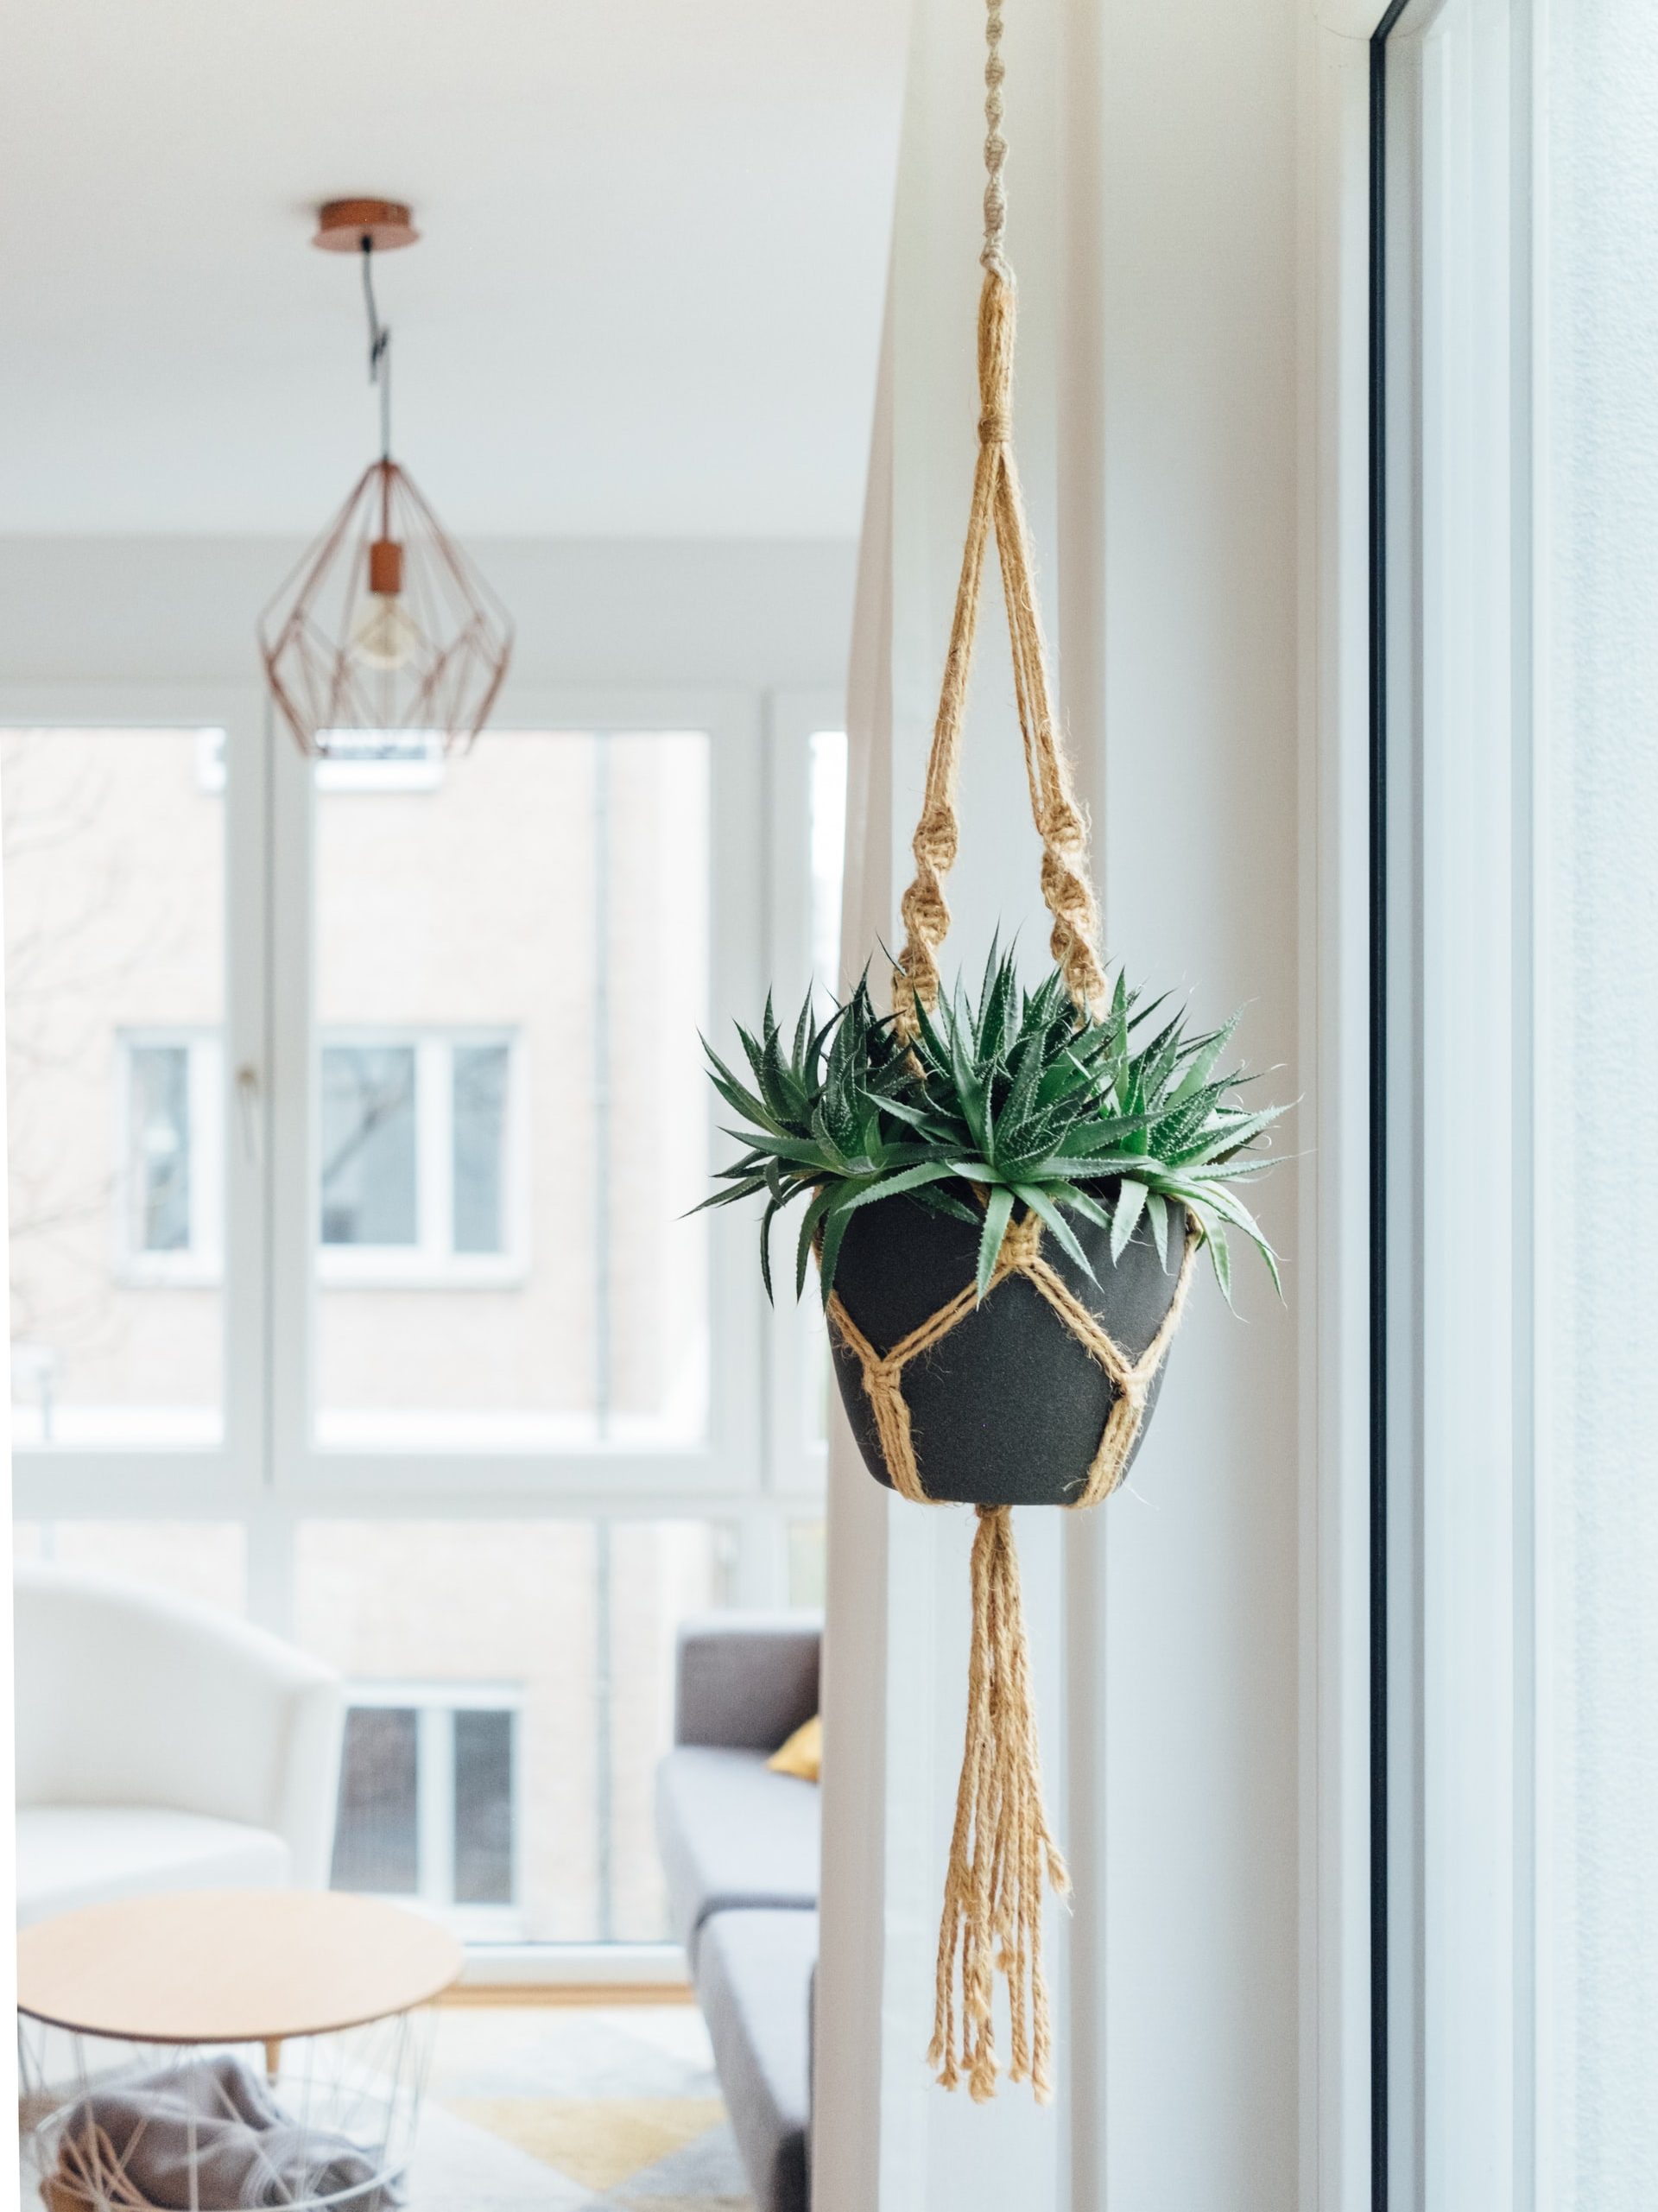 A green plant hanging by a window in a white room